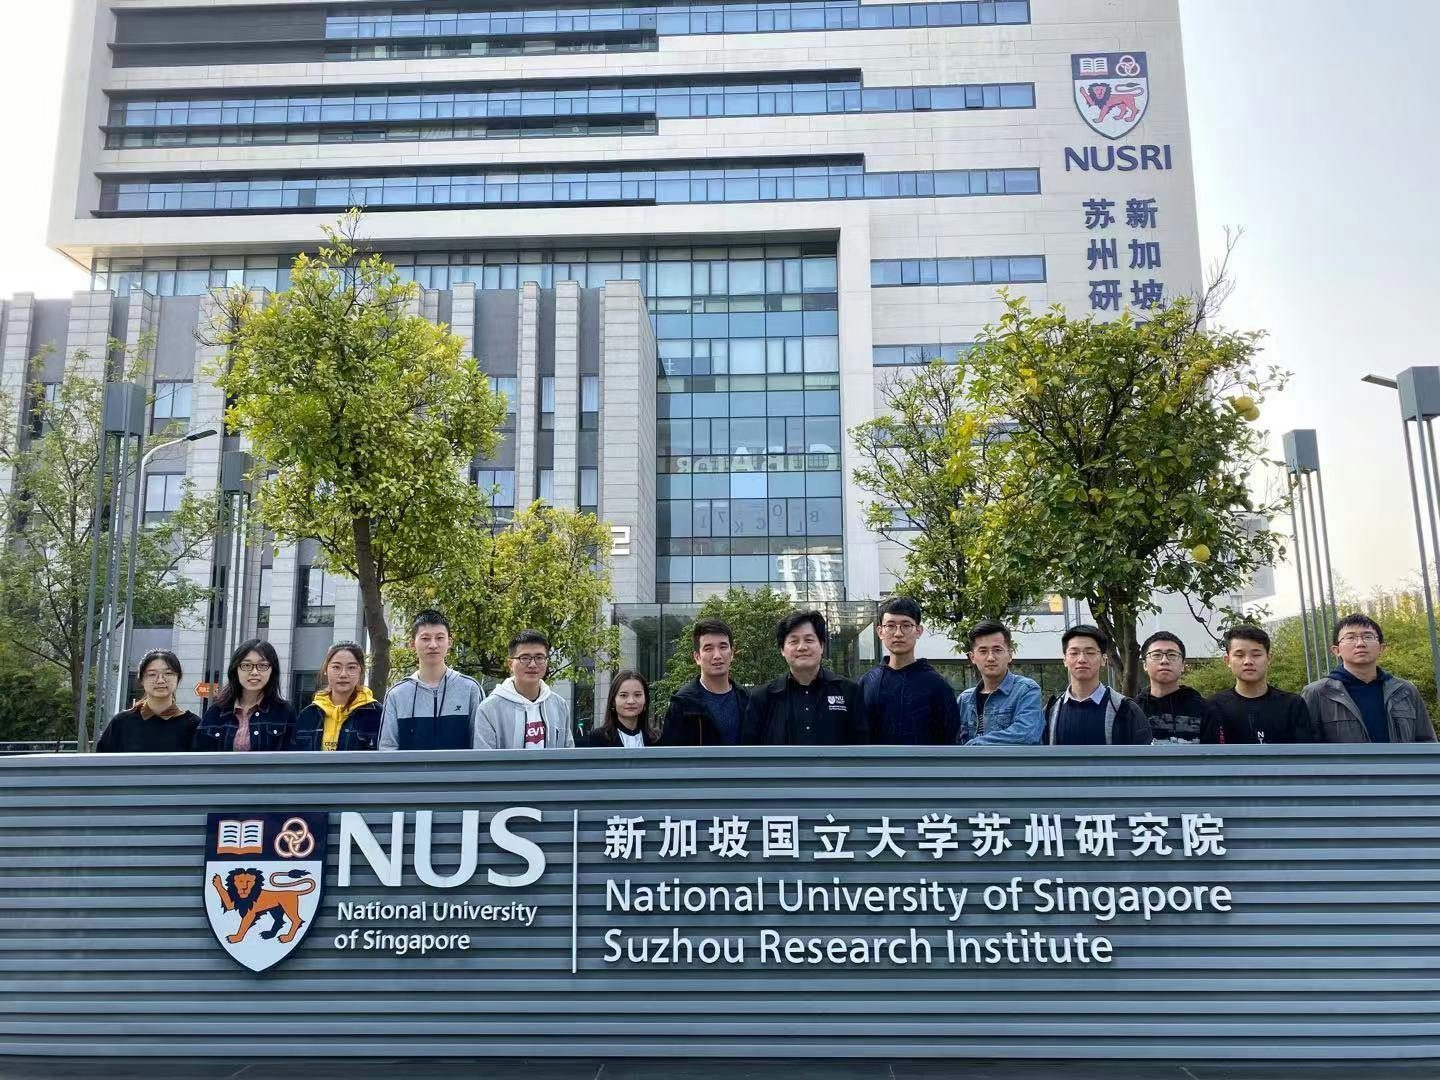 A group photo in front of the National University of Singapore (NUS)